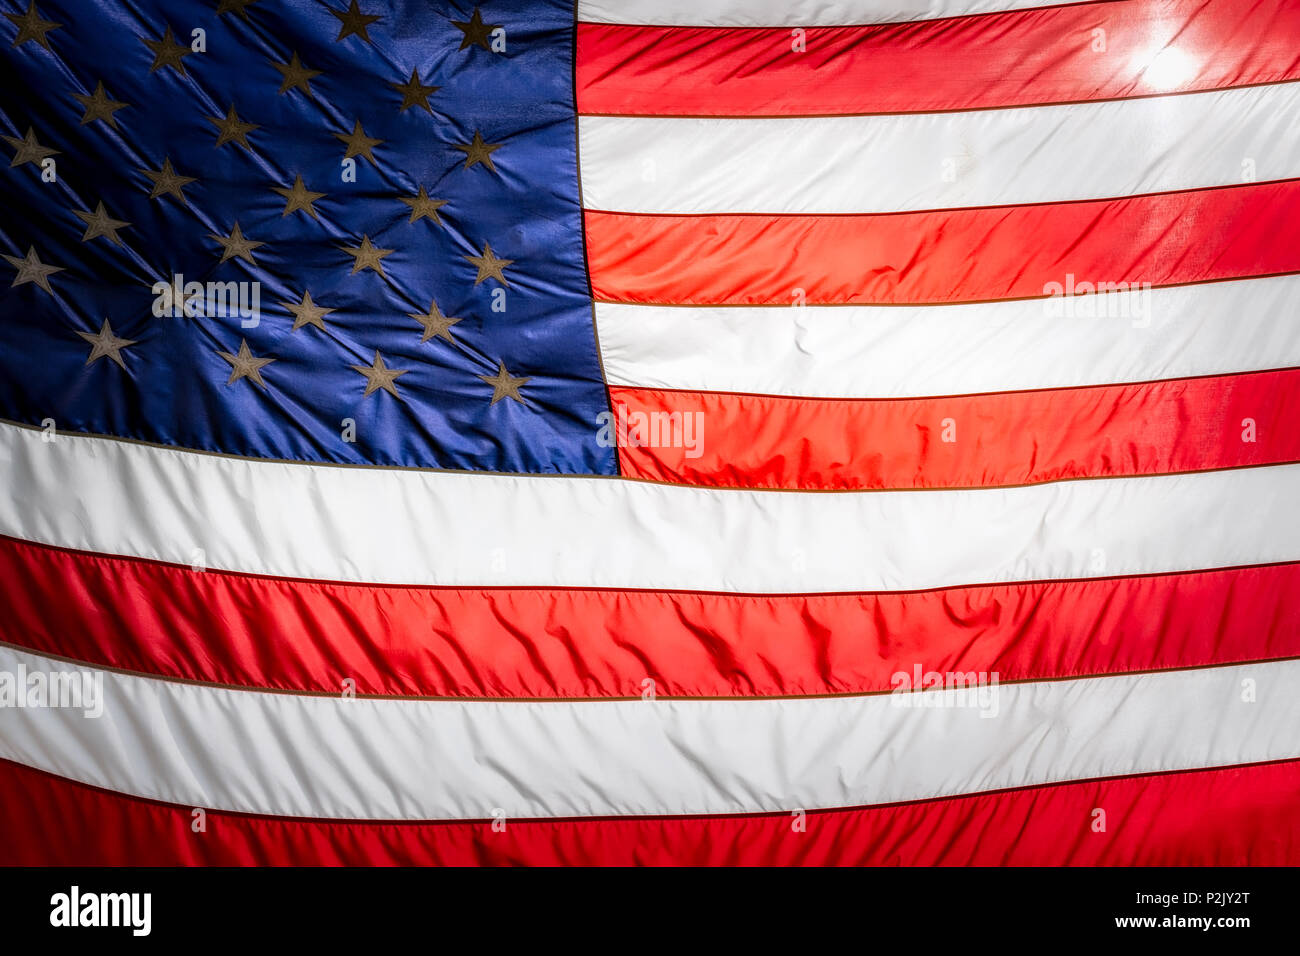 The sun shining behind the stripes of an American flag. Stock Photo